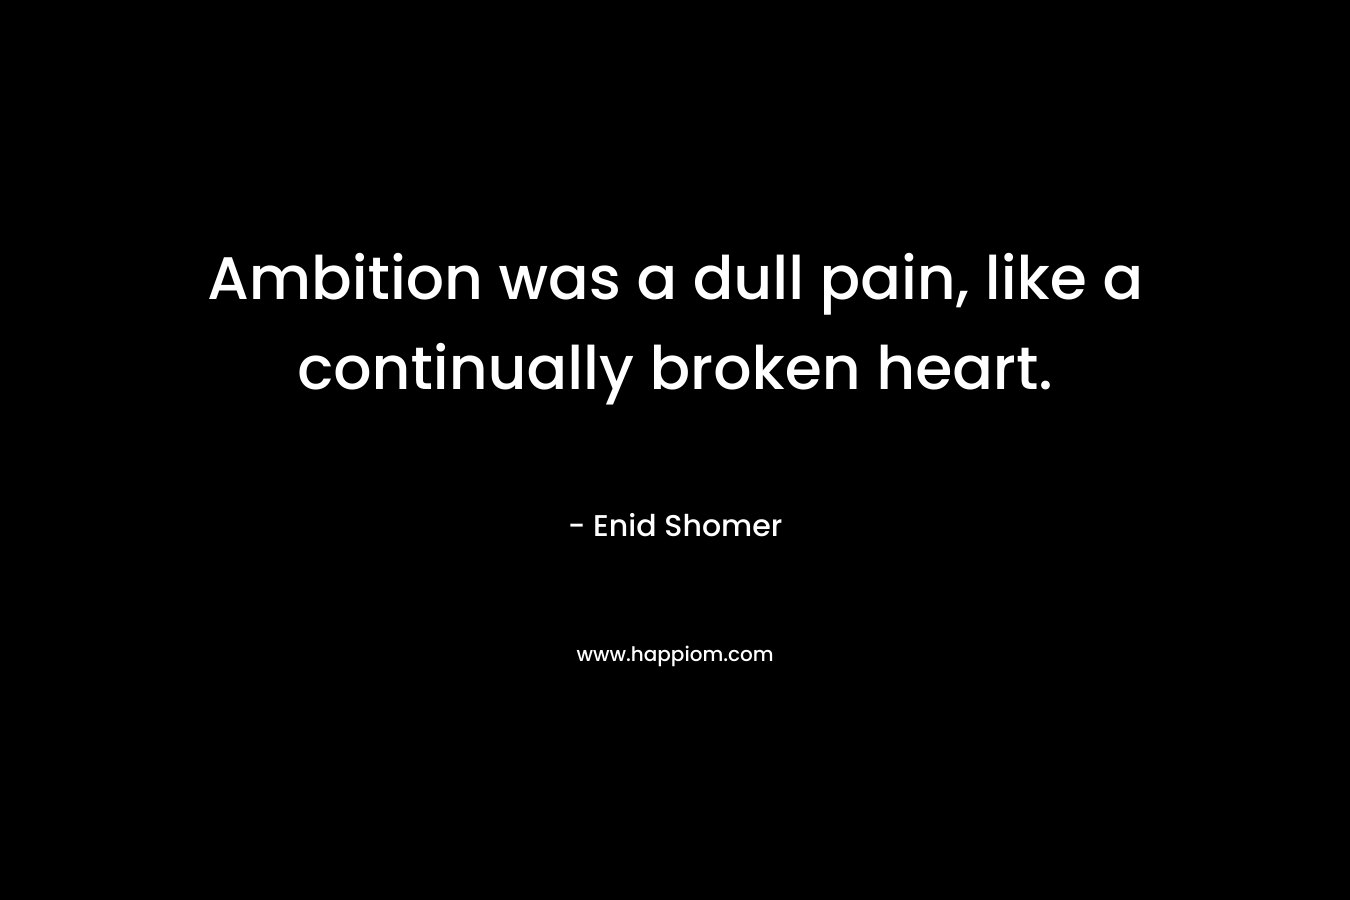 Ambition was a dull pain, like a continually broken heart. – Enid Shomer